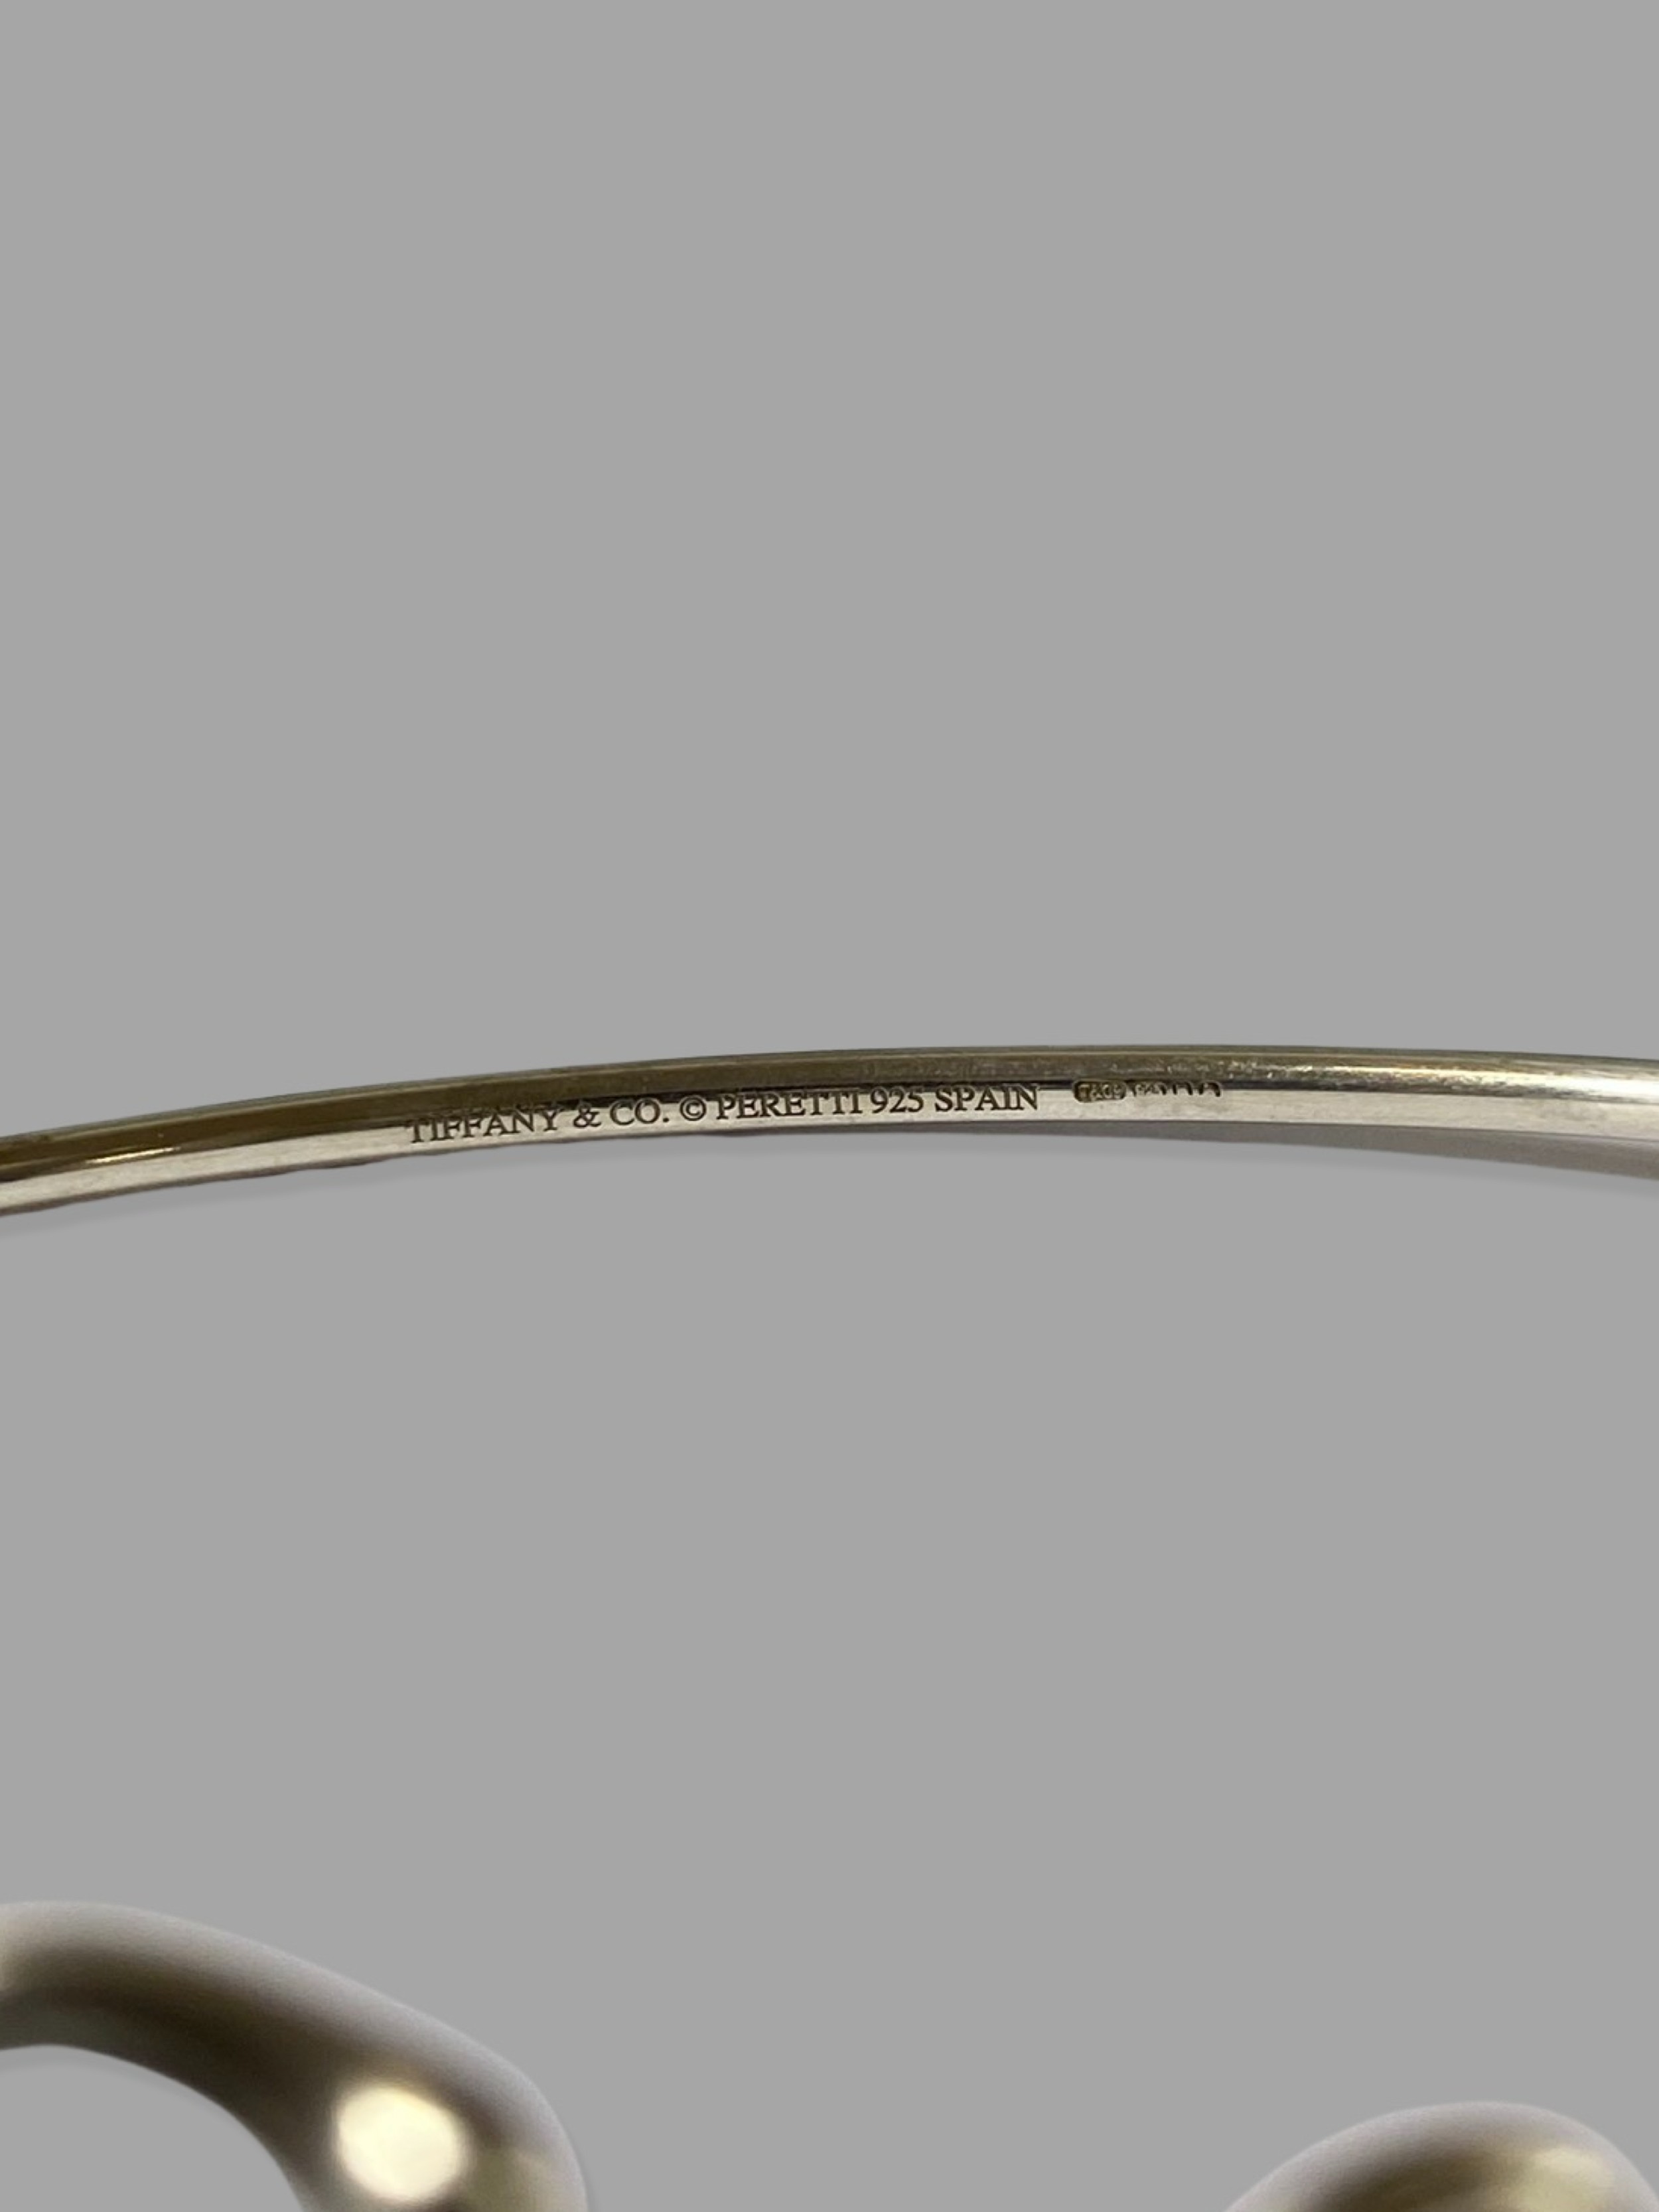 Tiffany & Co. silver love bangle weighing 7.26 grams - Image 2 of 2